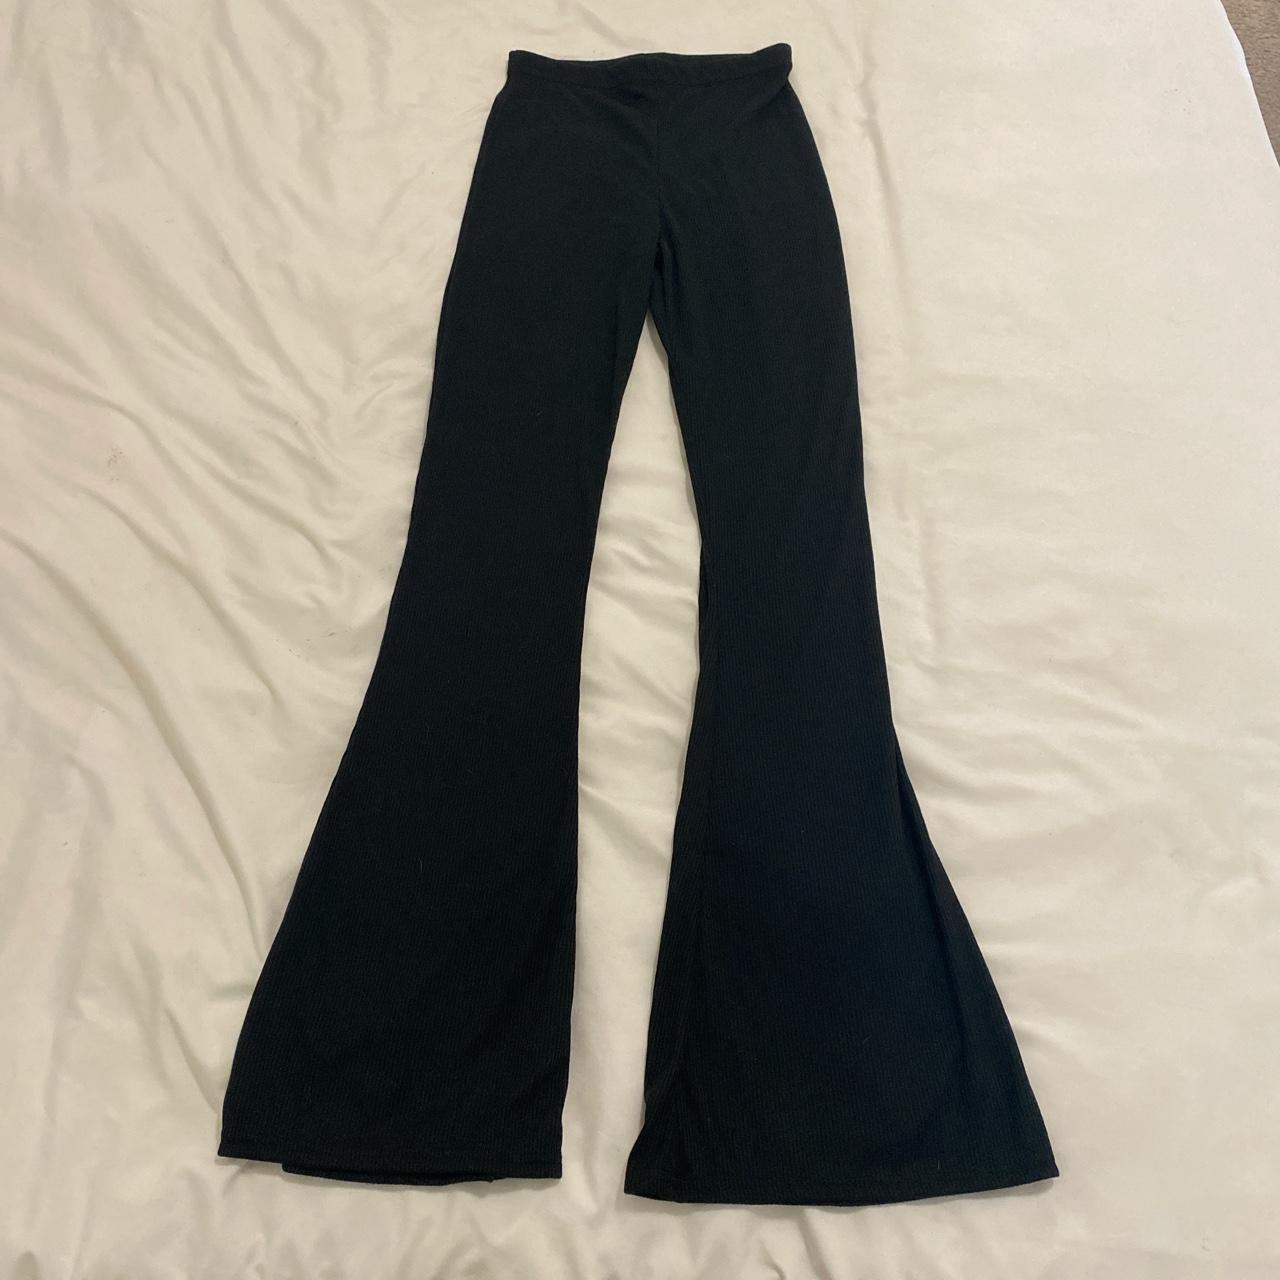 Pretty Little Thing ribbed flare pants Size 4 Love... - Depop